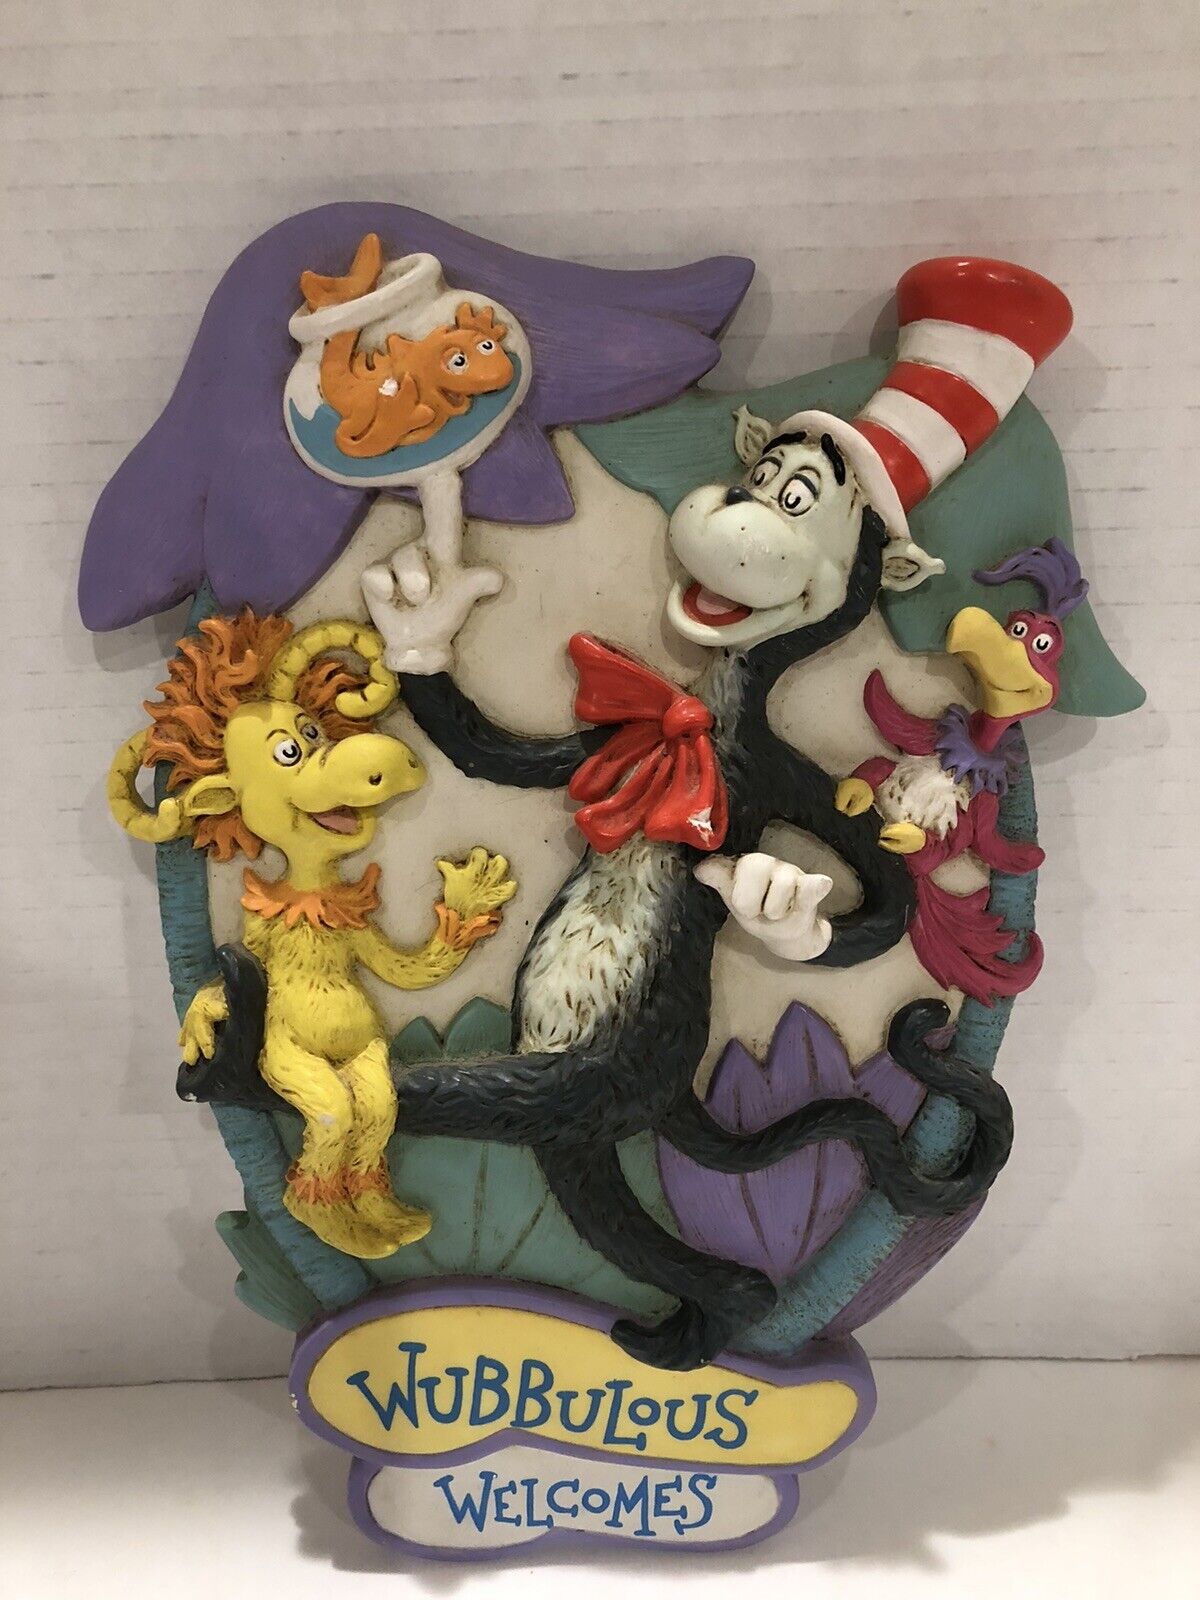 Dr. Seuss Cat in the Hat Wubbulous Welcomes Hanging Wall Plaque 1998